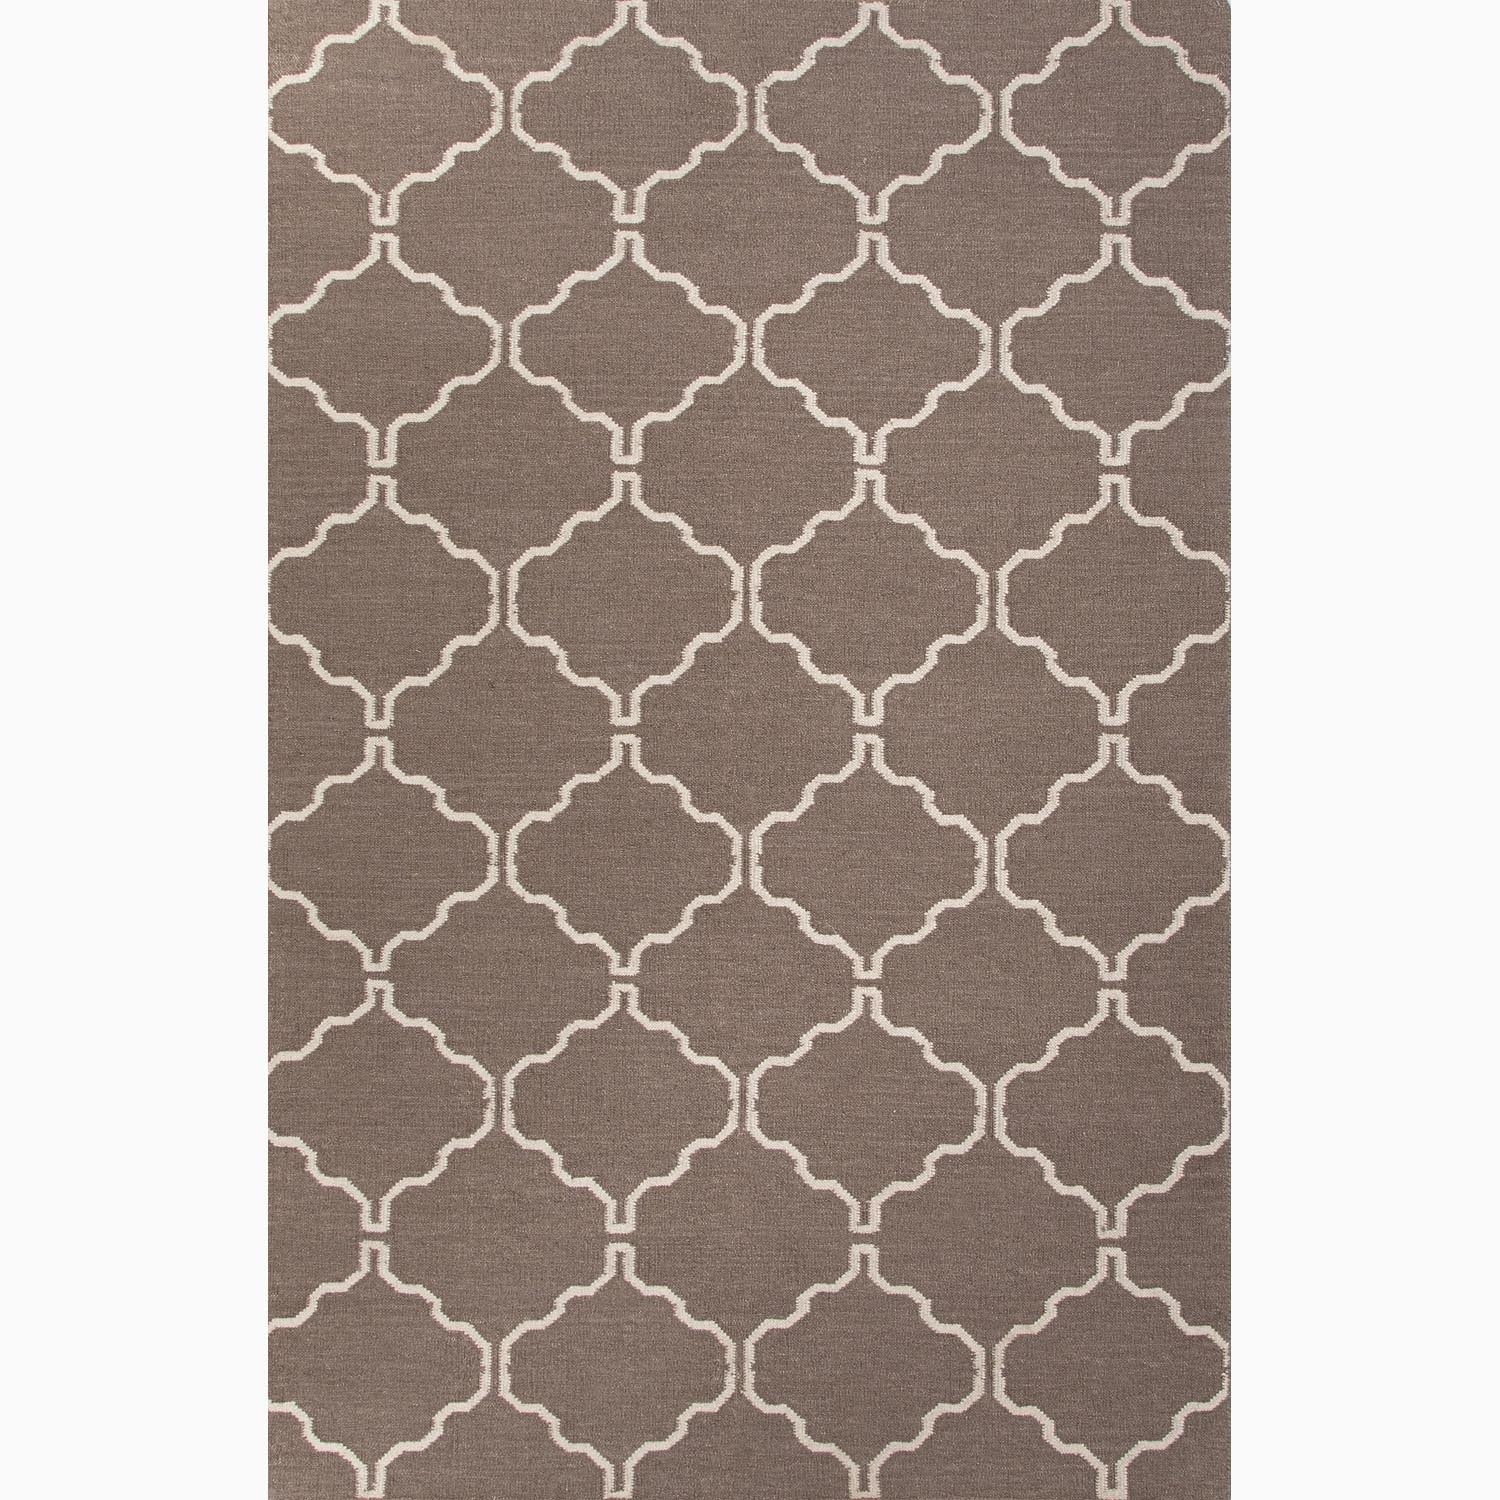 Hand made Moroccan Pattern Gray/ Ivory Wool Rug (2x3)